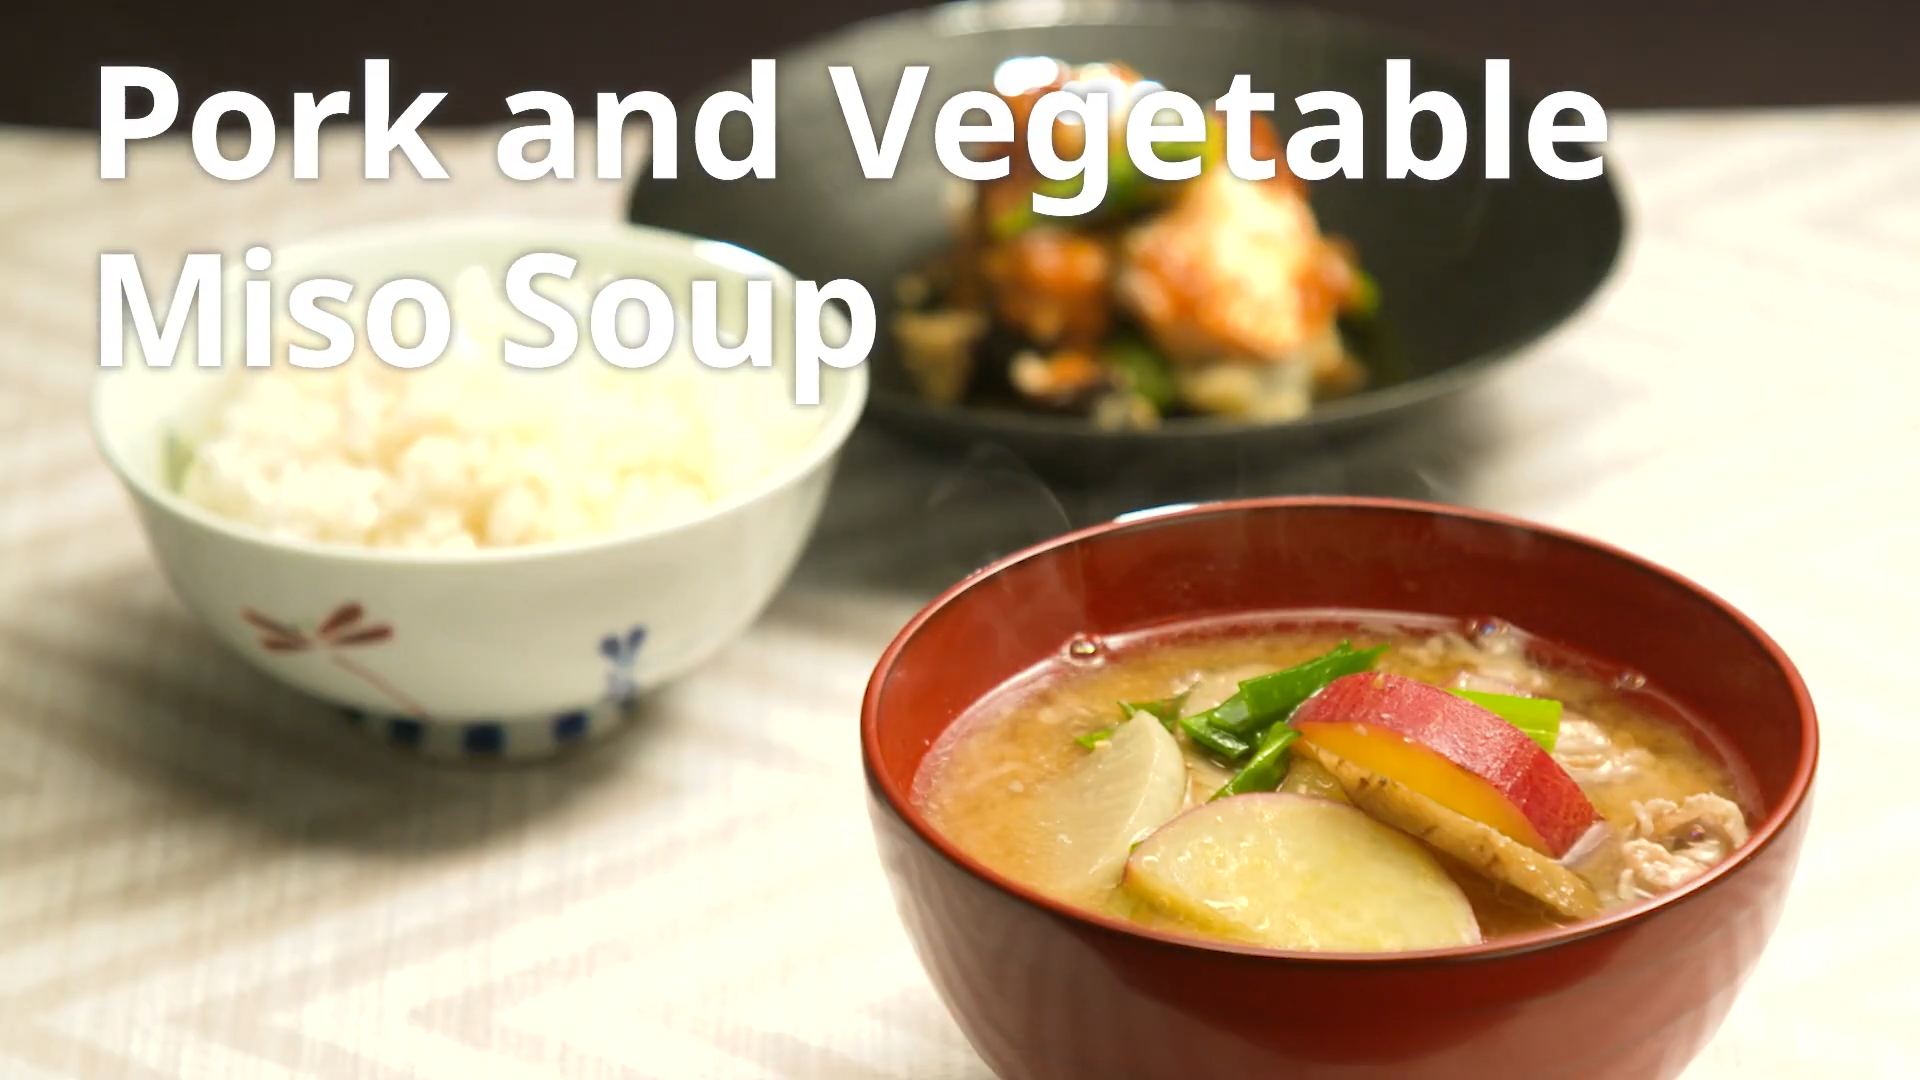 Pork and Vegetable Miso Soup